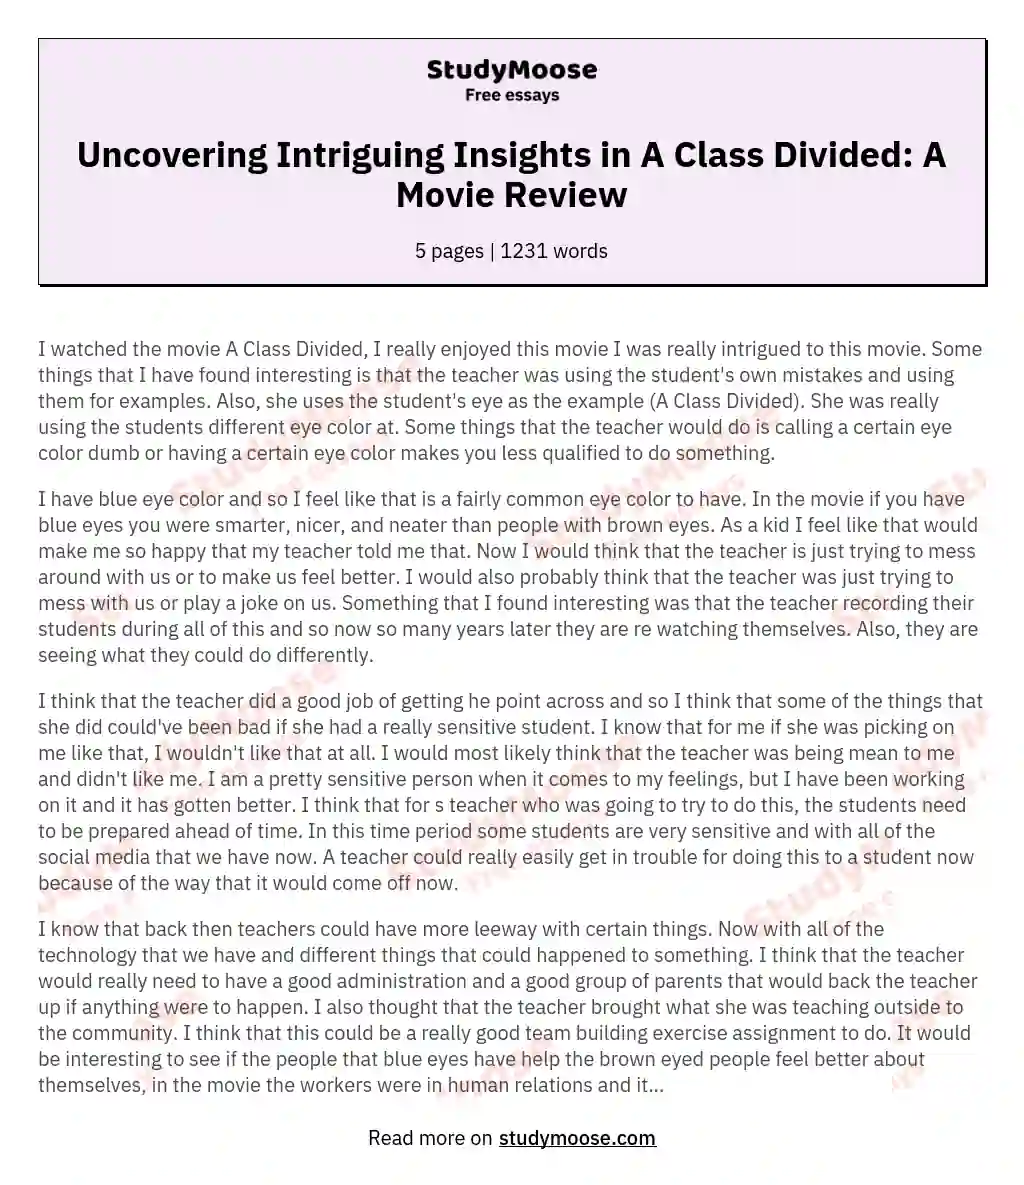 Uncovering Intriguing Insights in A Class Divided: A Movie Review essay